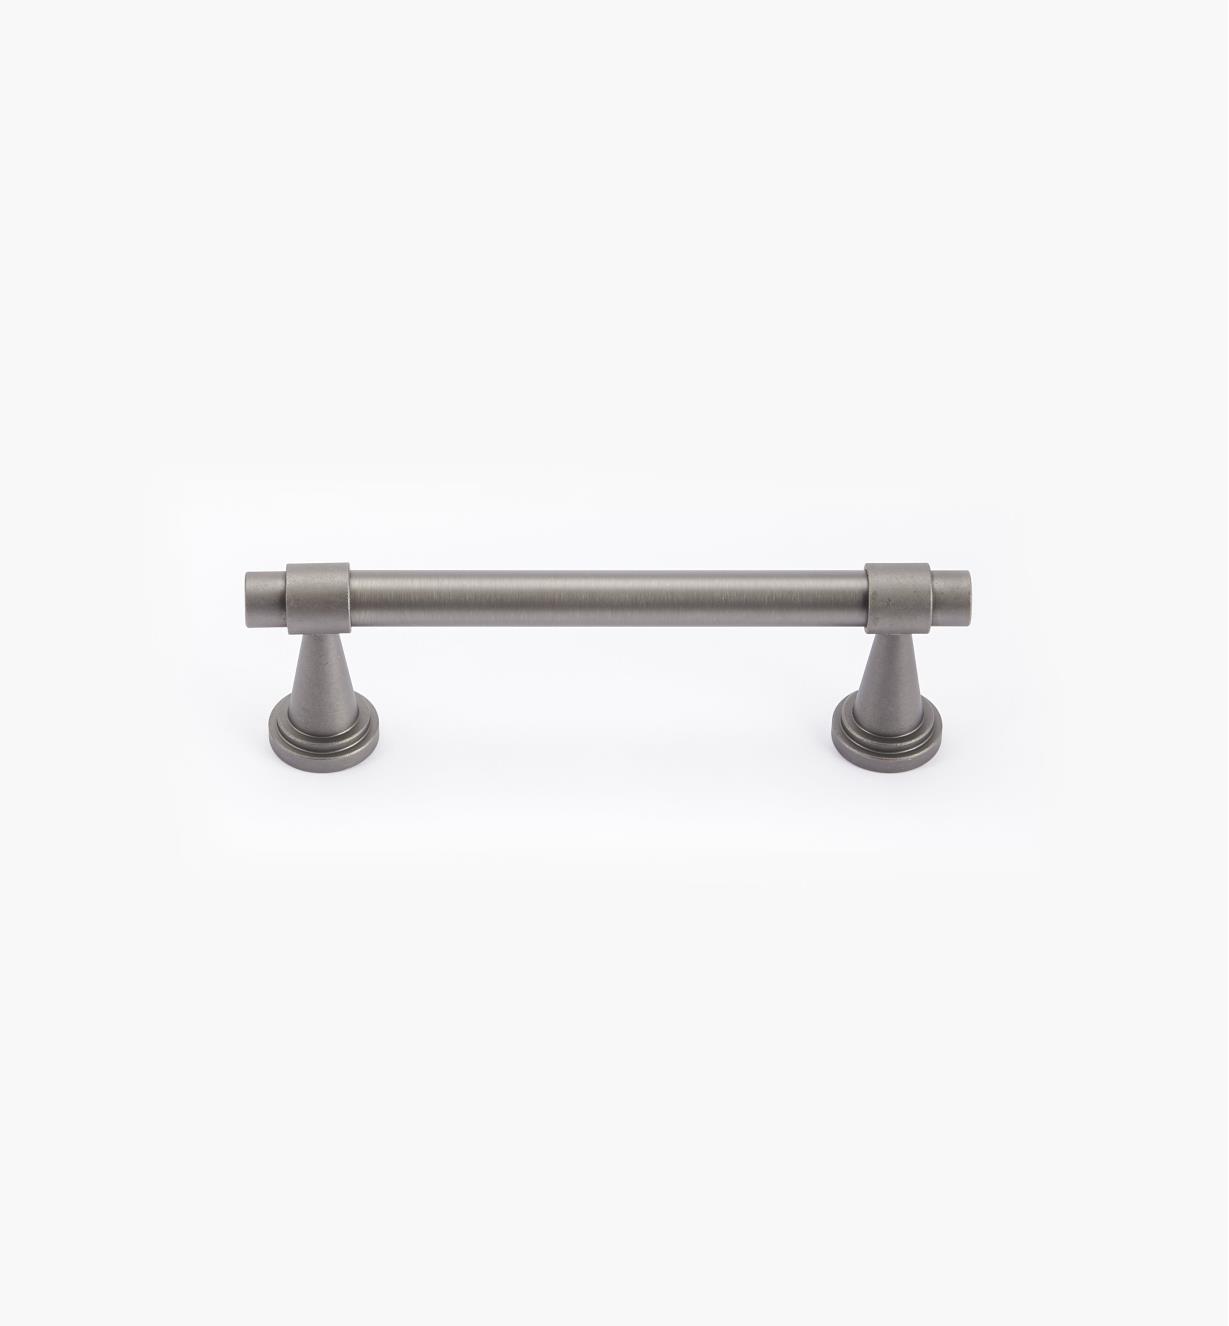 00W0725 - Concerto Hardware - 128mm Pewter Handle